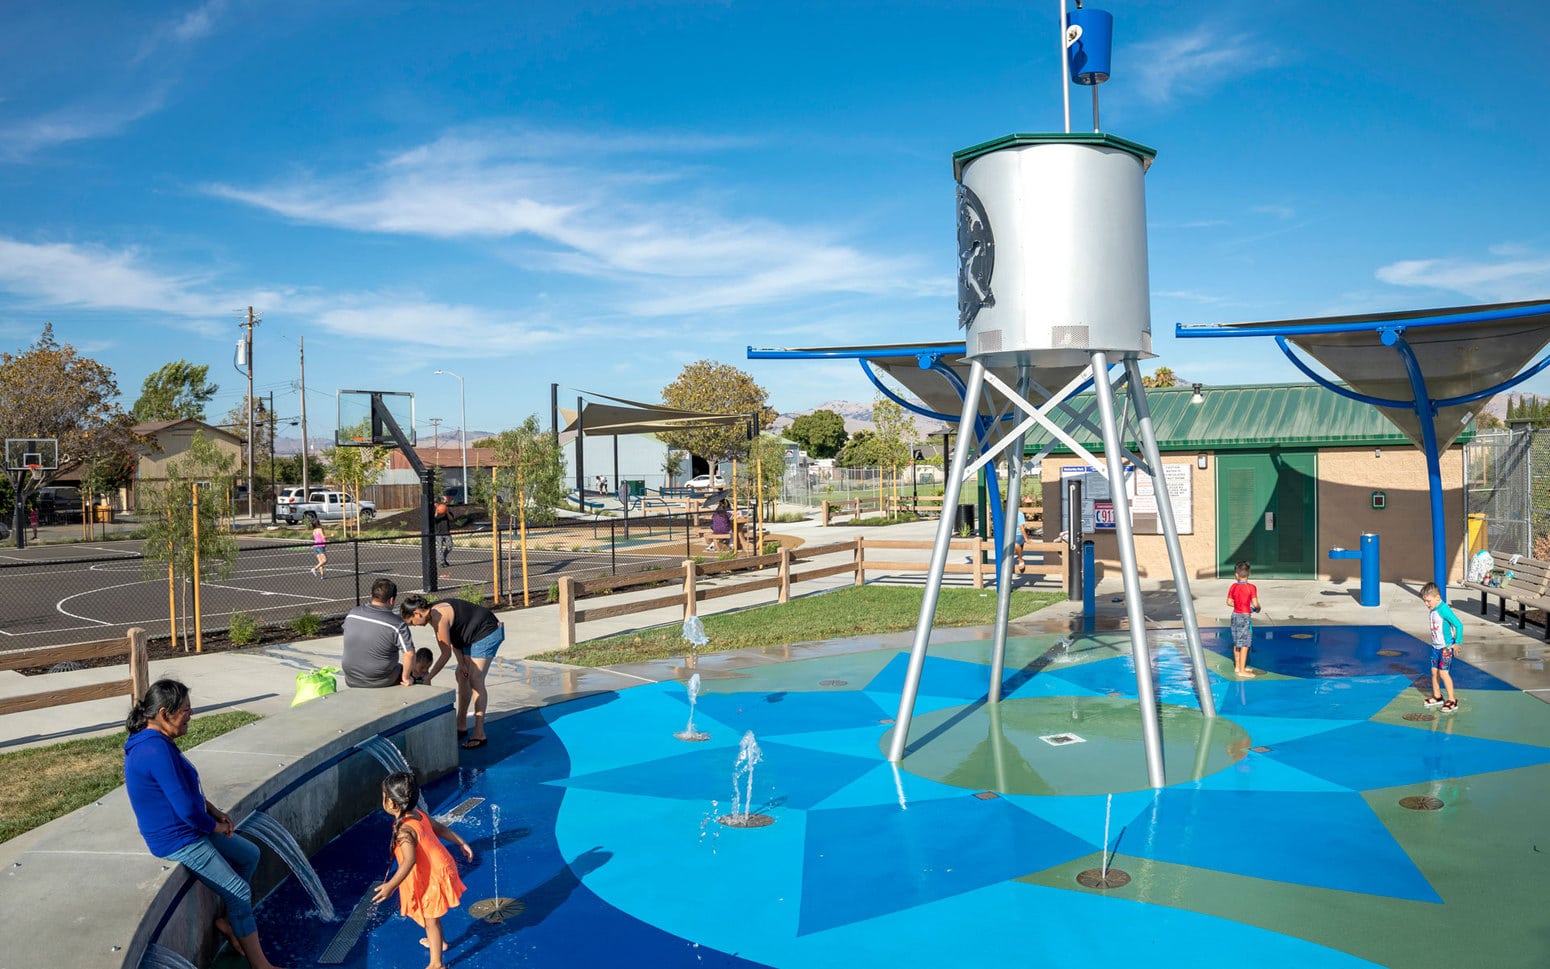 Splash pad with water tower that dumps water from a bucket and children playing—basketball courts in background